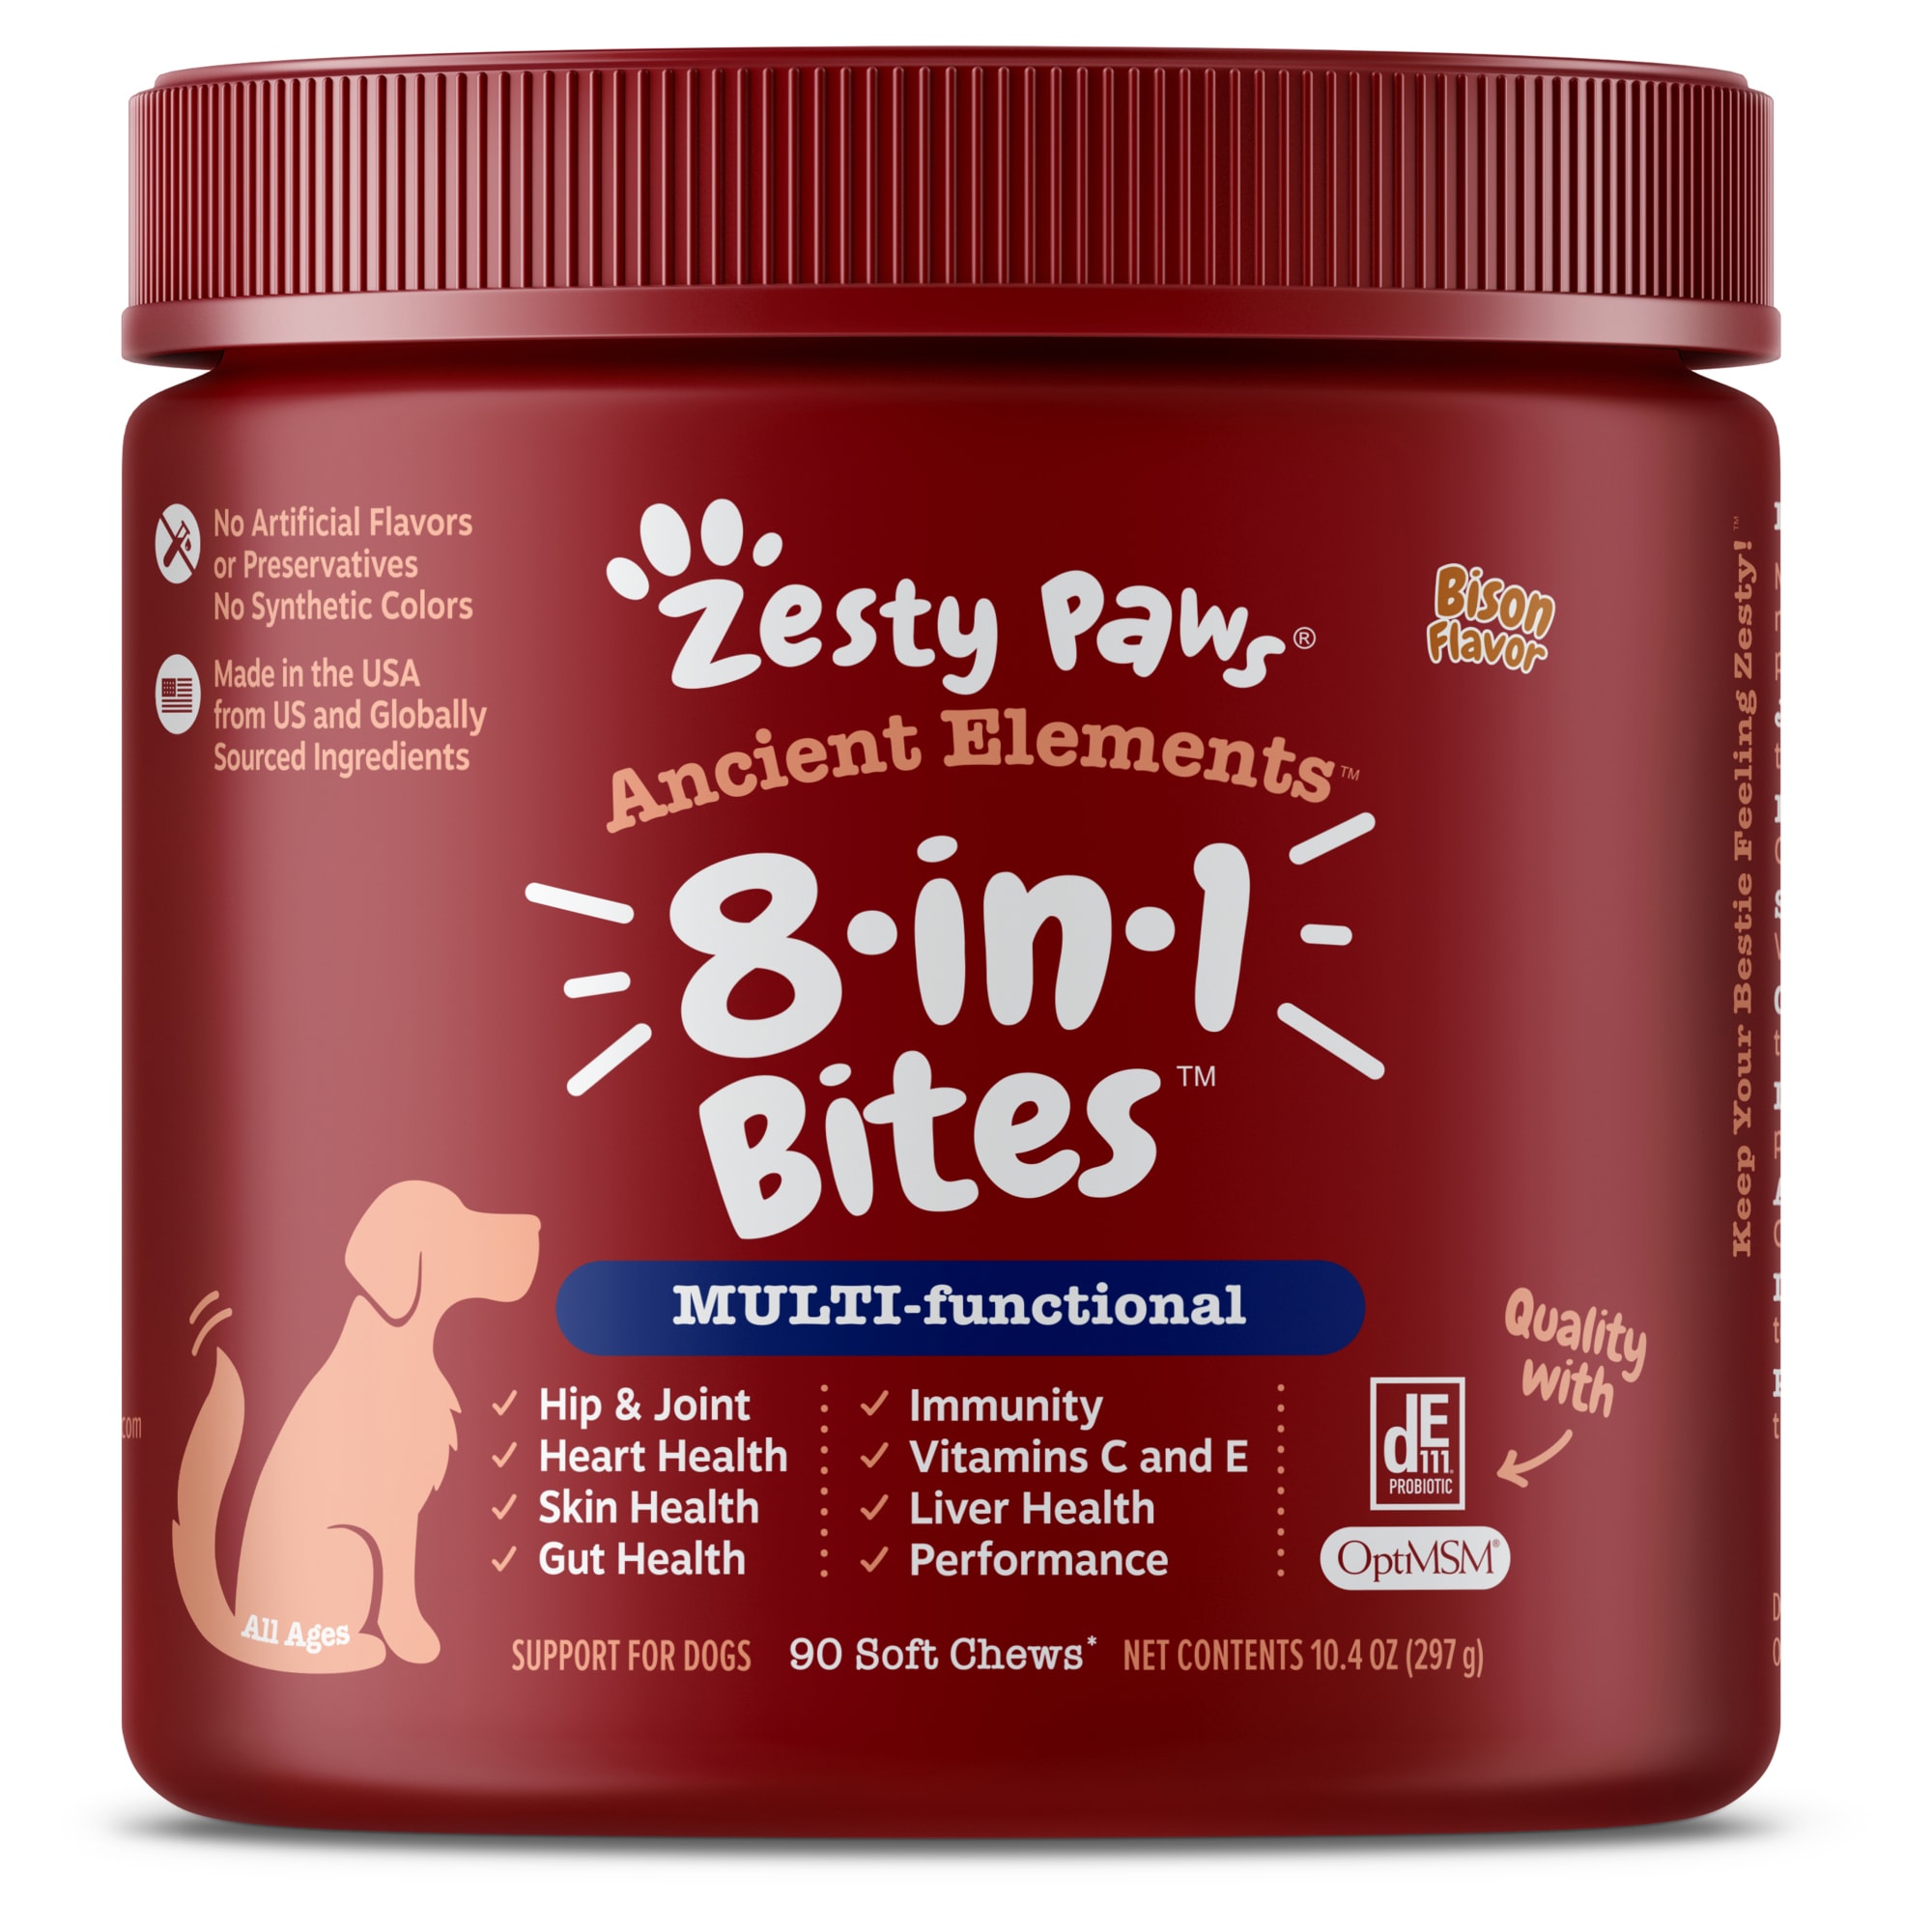 Photos - Dog Medicines & Vitamins Zesty Paws Bison Ancient Elements 8-in-1 Bites for Dogs, 10.4 o 